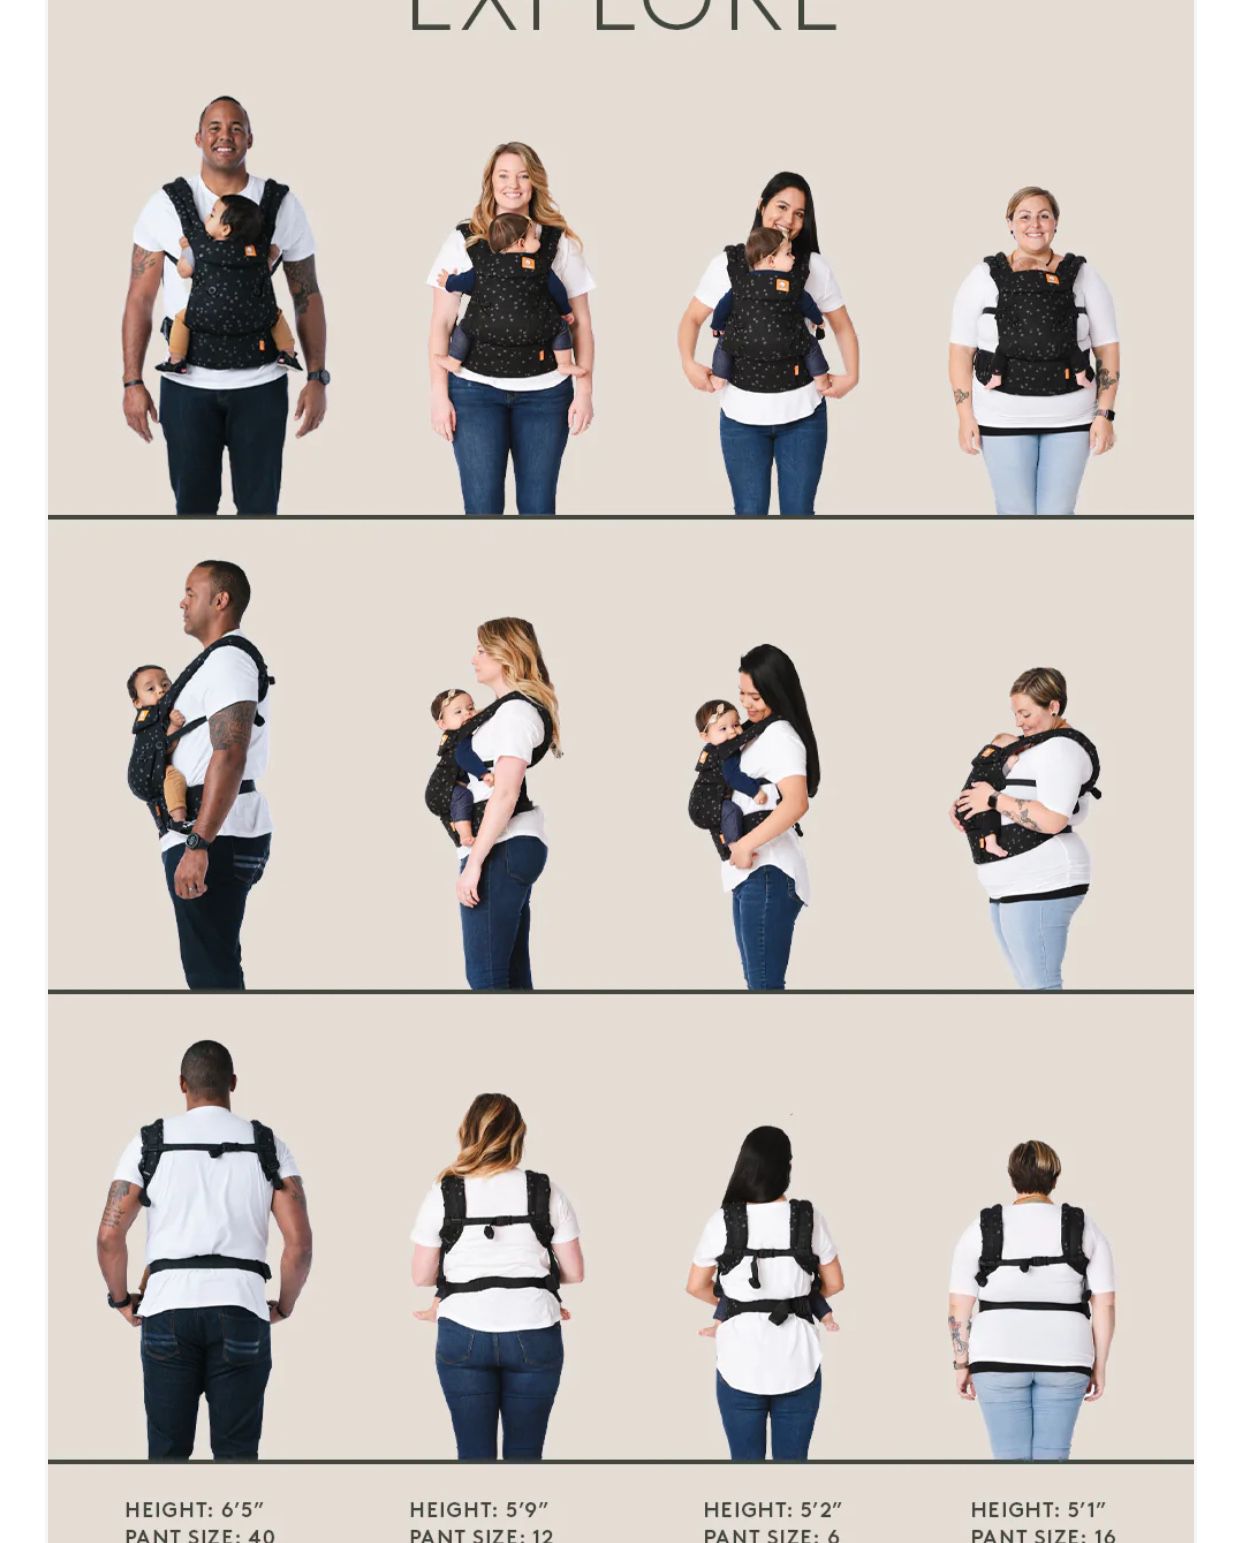 Tula Baby Carrier 